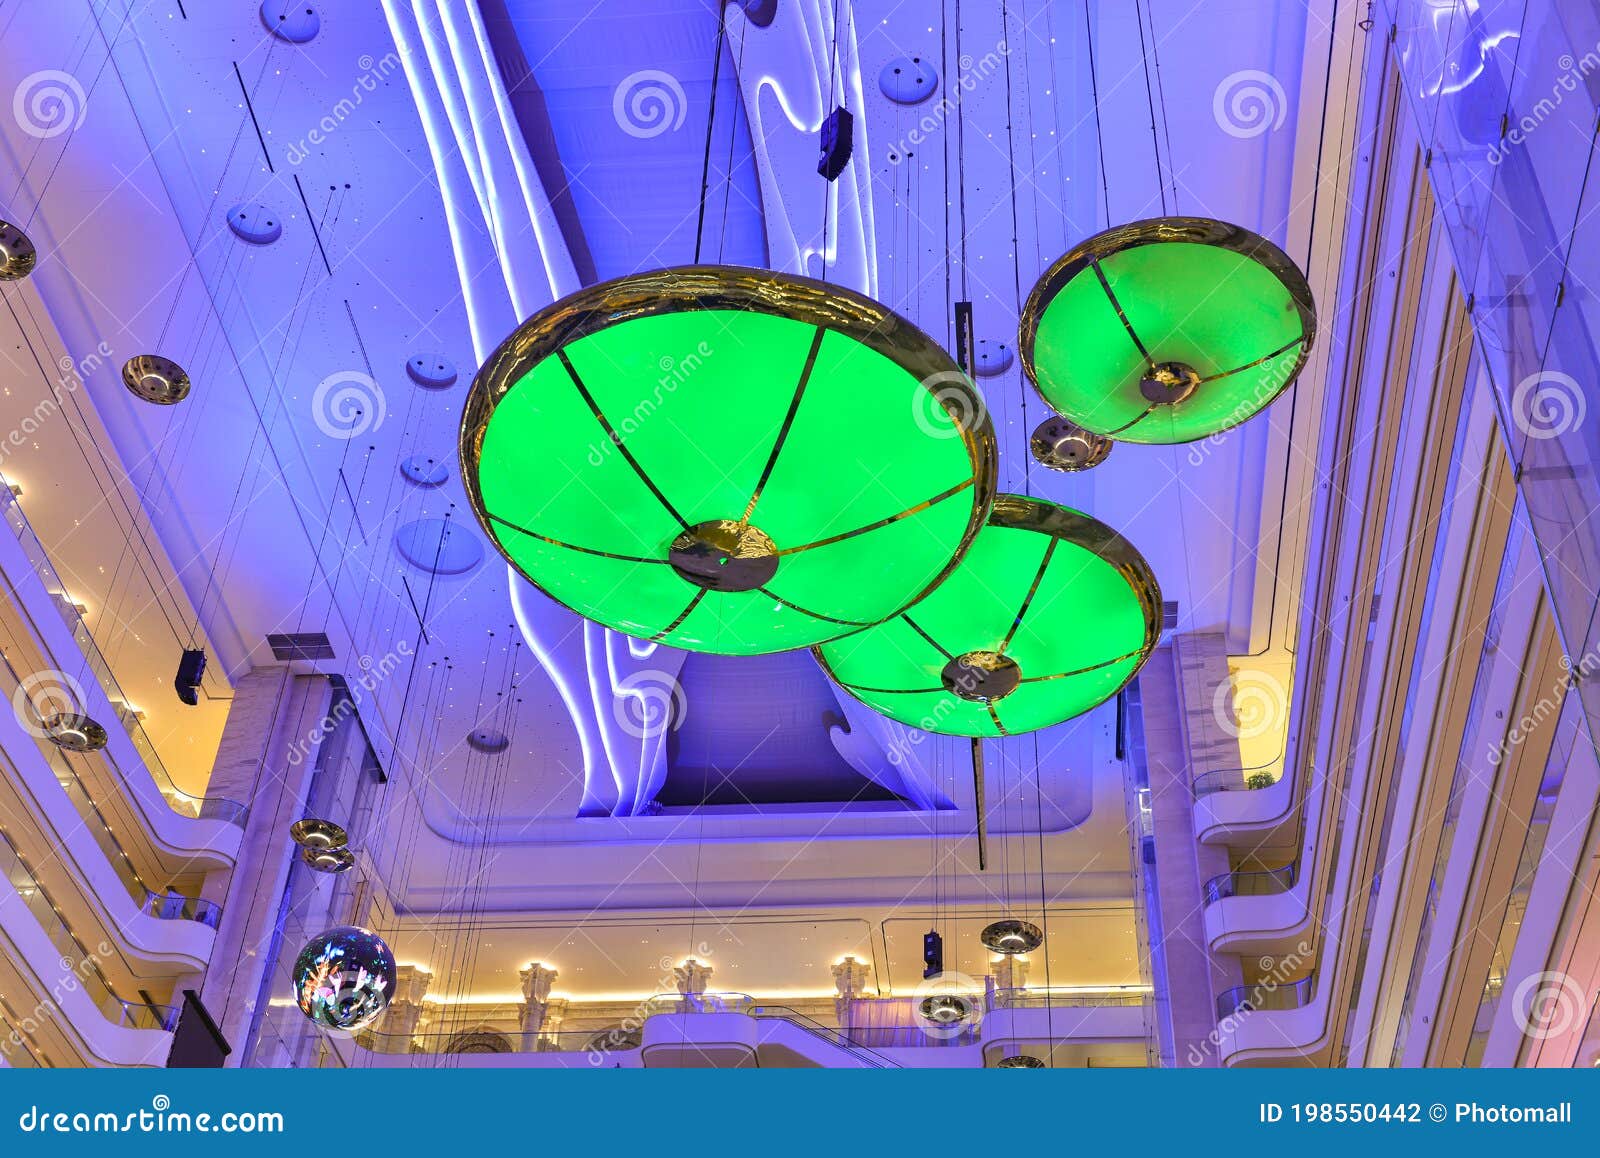 large chandelier droplight ceiling lamp in modern commercial building hall